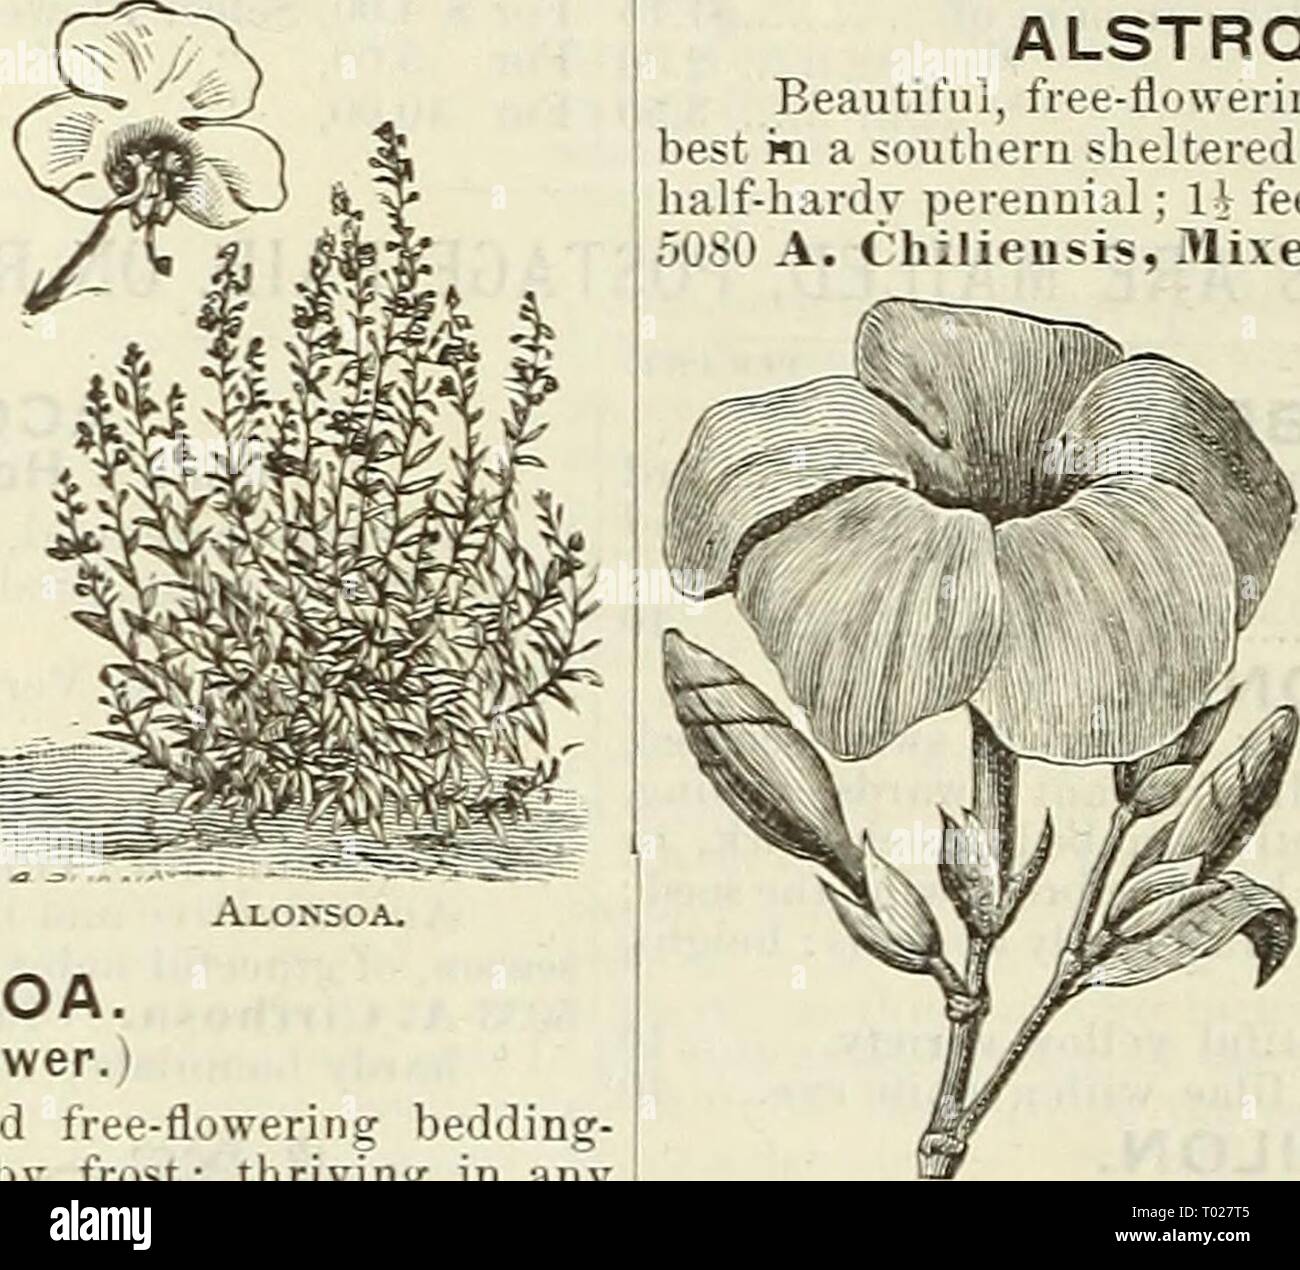 Dreer's garden calendar for 1888 . dreersgardencale1888henr Year: 1888  Agrostemma. ALONSOA. (Mask Flower. I Handsome brilliant-colored free-flowering bedding- giants, blooming until killed by frost; thriving in any .good garden soil, also good house-plants ; half-hardy an- nuals. 5065 A. Grandiflora. Large-flowering; bright-scarlet; 2 feet 5 5070— Mixed. All colors ; 2 feet 5    A LYSSU M—Continued. 50S7 A. Little Gem. This is an exceedingly pretty and entirely distinct dwarf variety of Sweet Alvs- sum. The plants are of very dwarf, compact, spreading habit, and only 3 to 5 inches in height,  Stock Photo